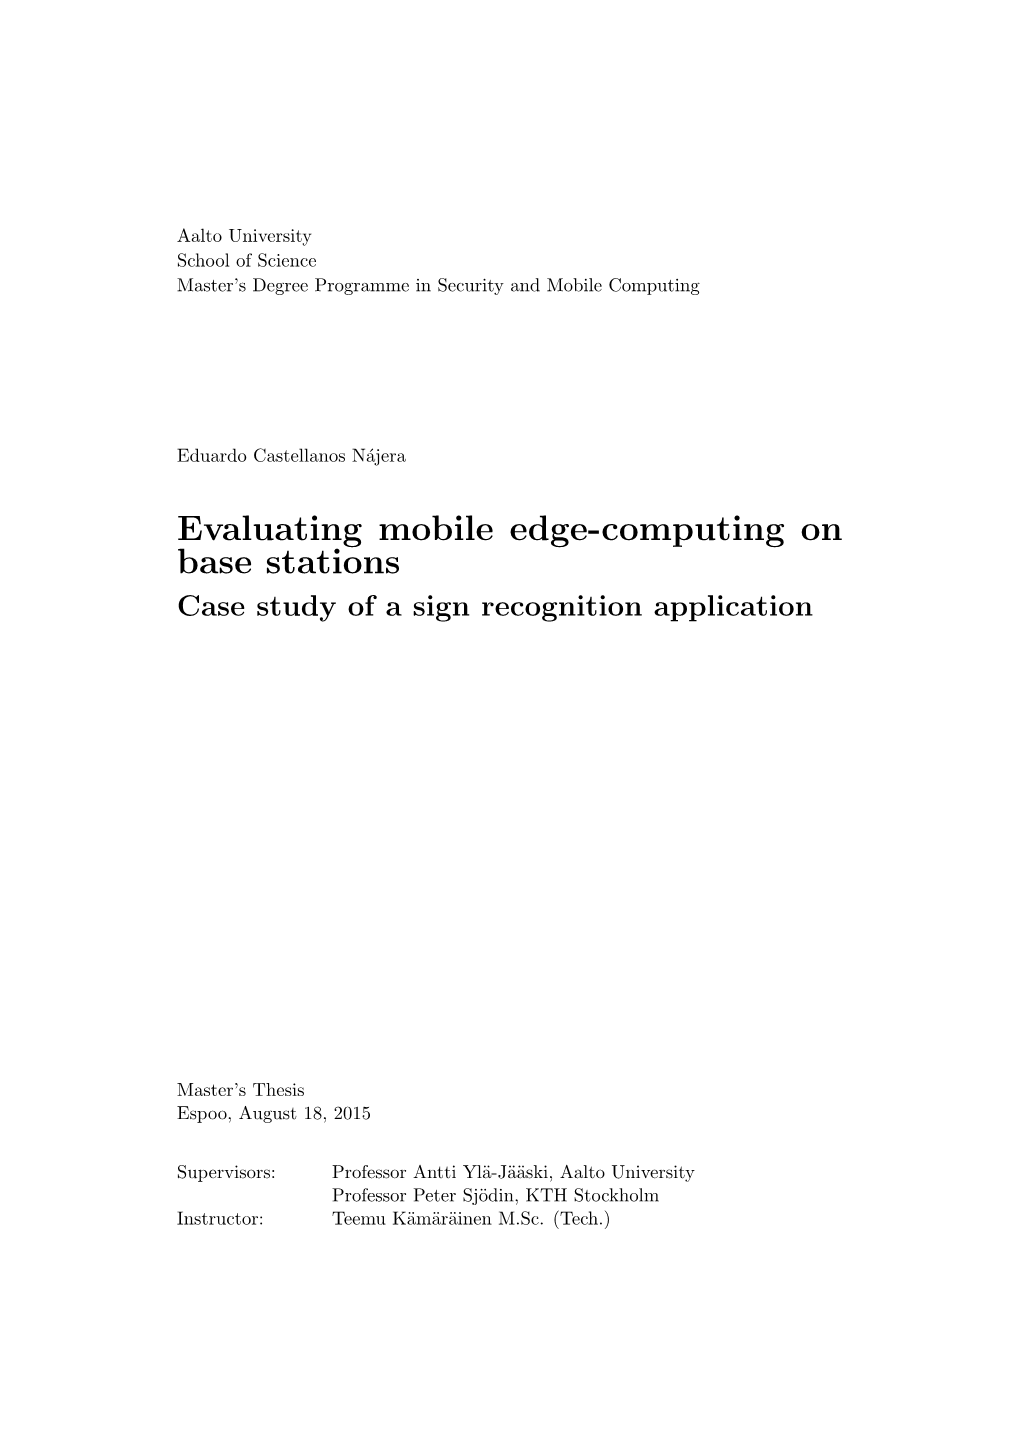 Evaluating Mobile Edge-Computing on Base Stations Case Study of a Sign Recognition Application